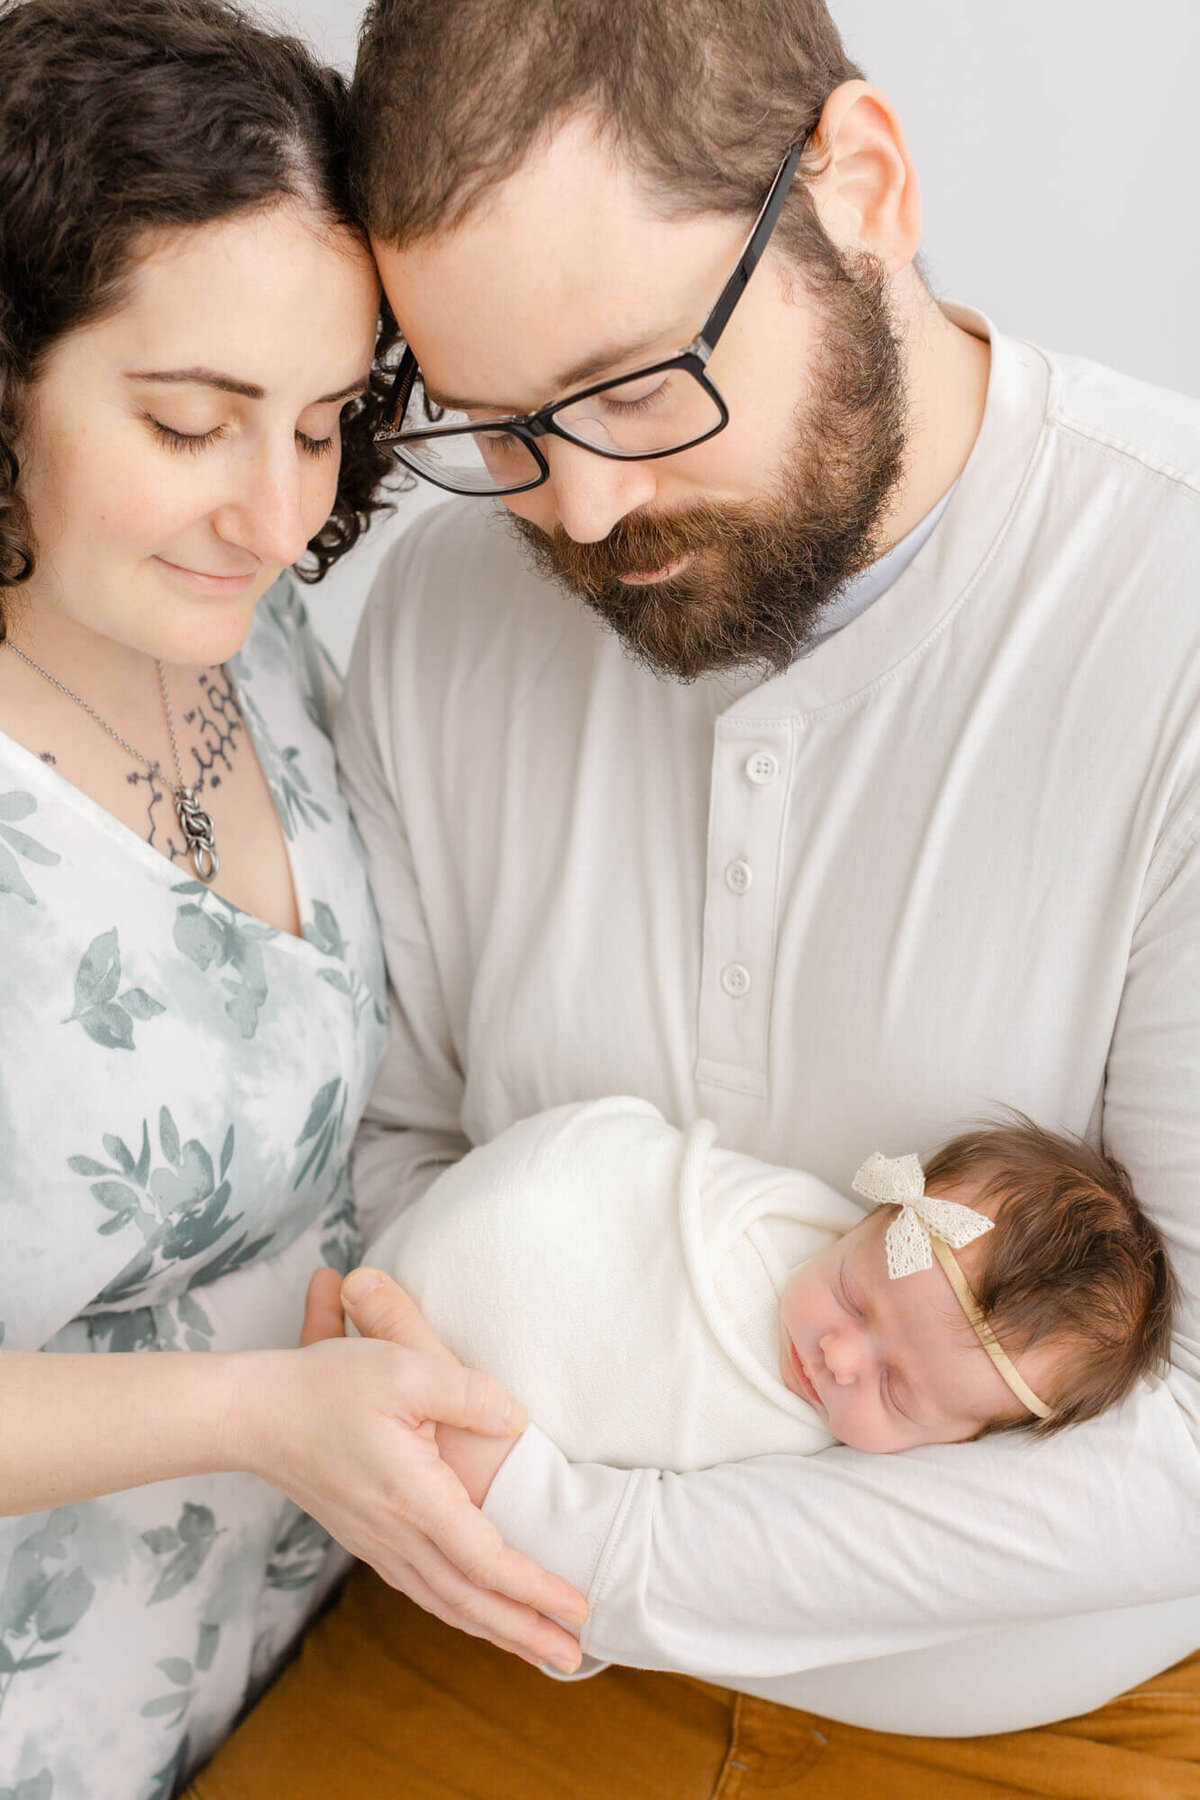 Dad is holding new baby girl in arms and Mom is standing next him. Mom and Dad's foreheads are touching. Baby is wrapped in white and sleeping peacefully. Mom is wearing a green floral dress and dad is wearing brown pants and a white henley.